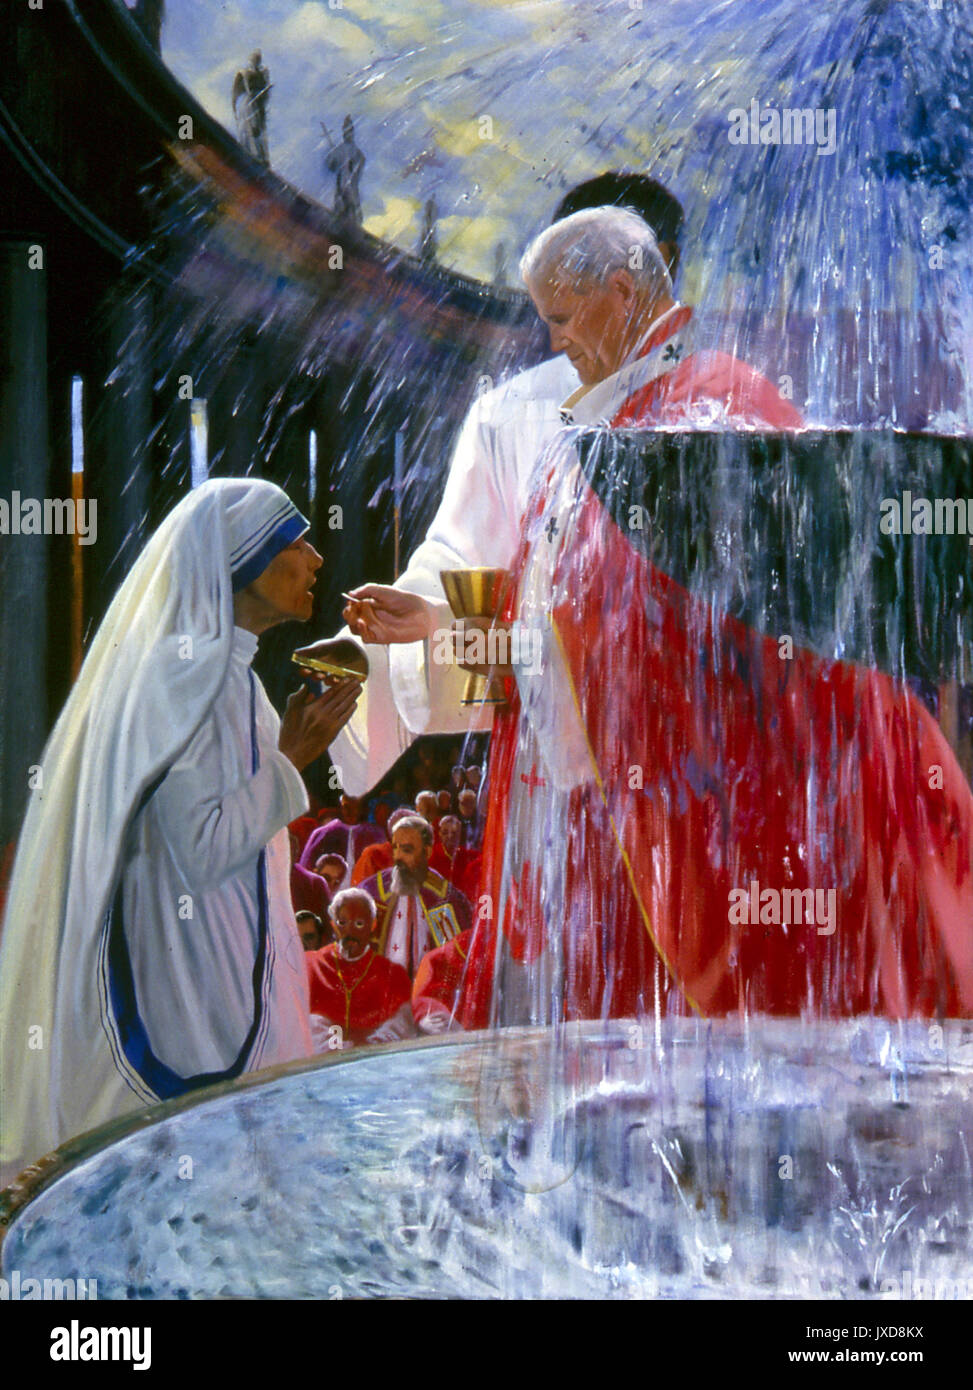 Mother Theresa receiving the Sacrament from John Paul II at a Mass 1982 in St. Peter's Square the large plaza located directly in front of St. Peter's Basilica in the Vatican. Stock Photo